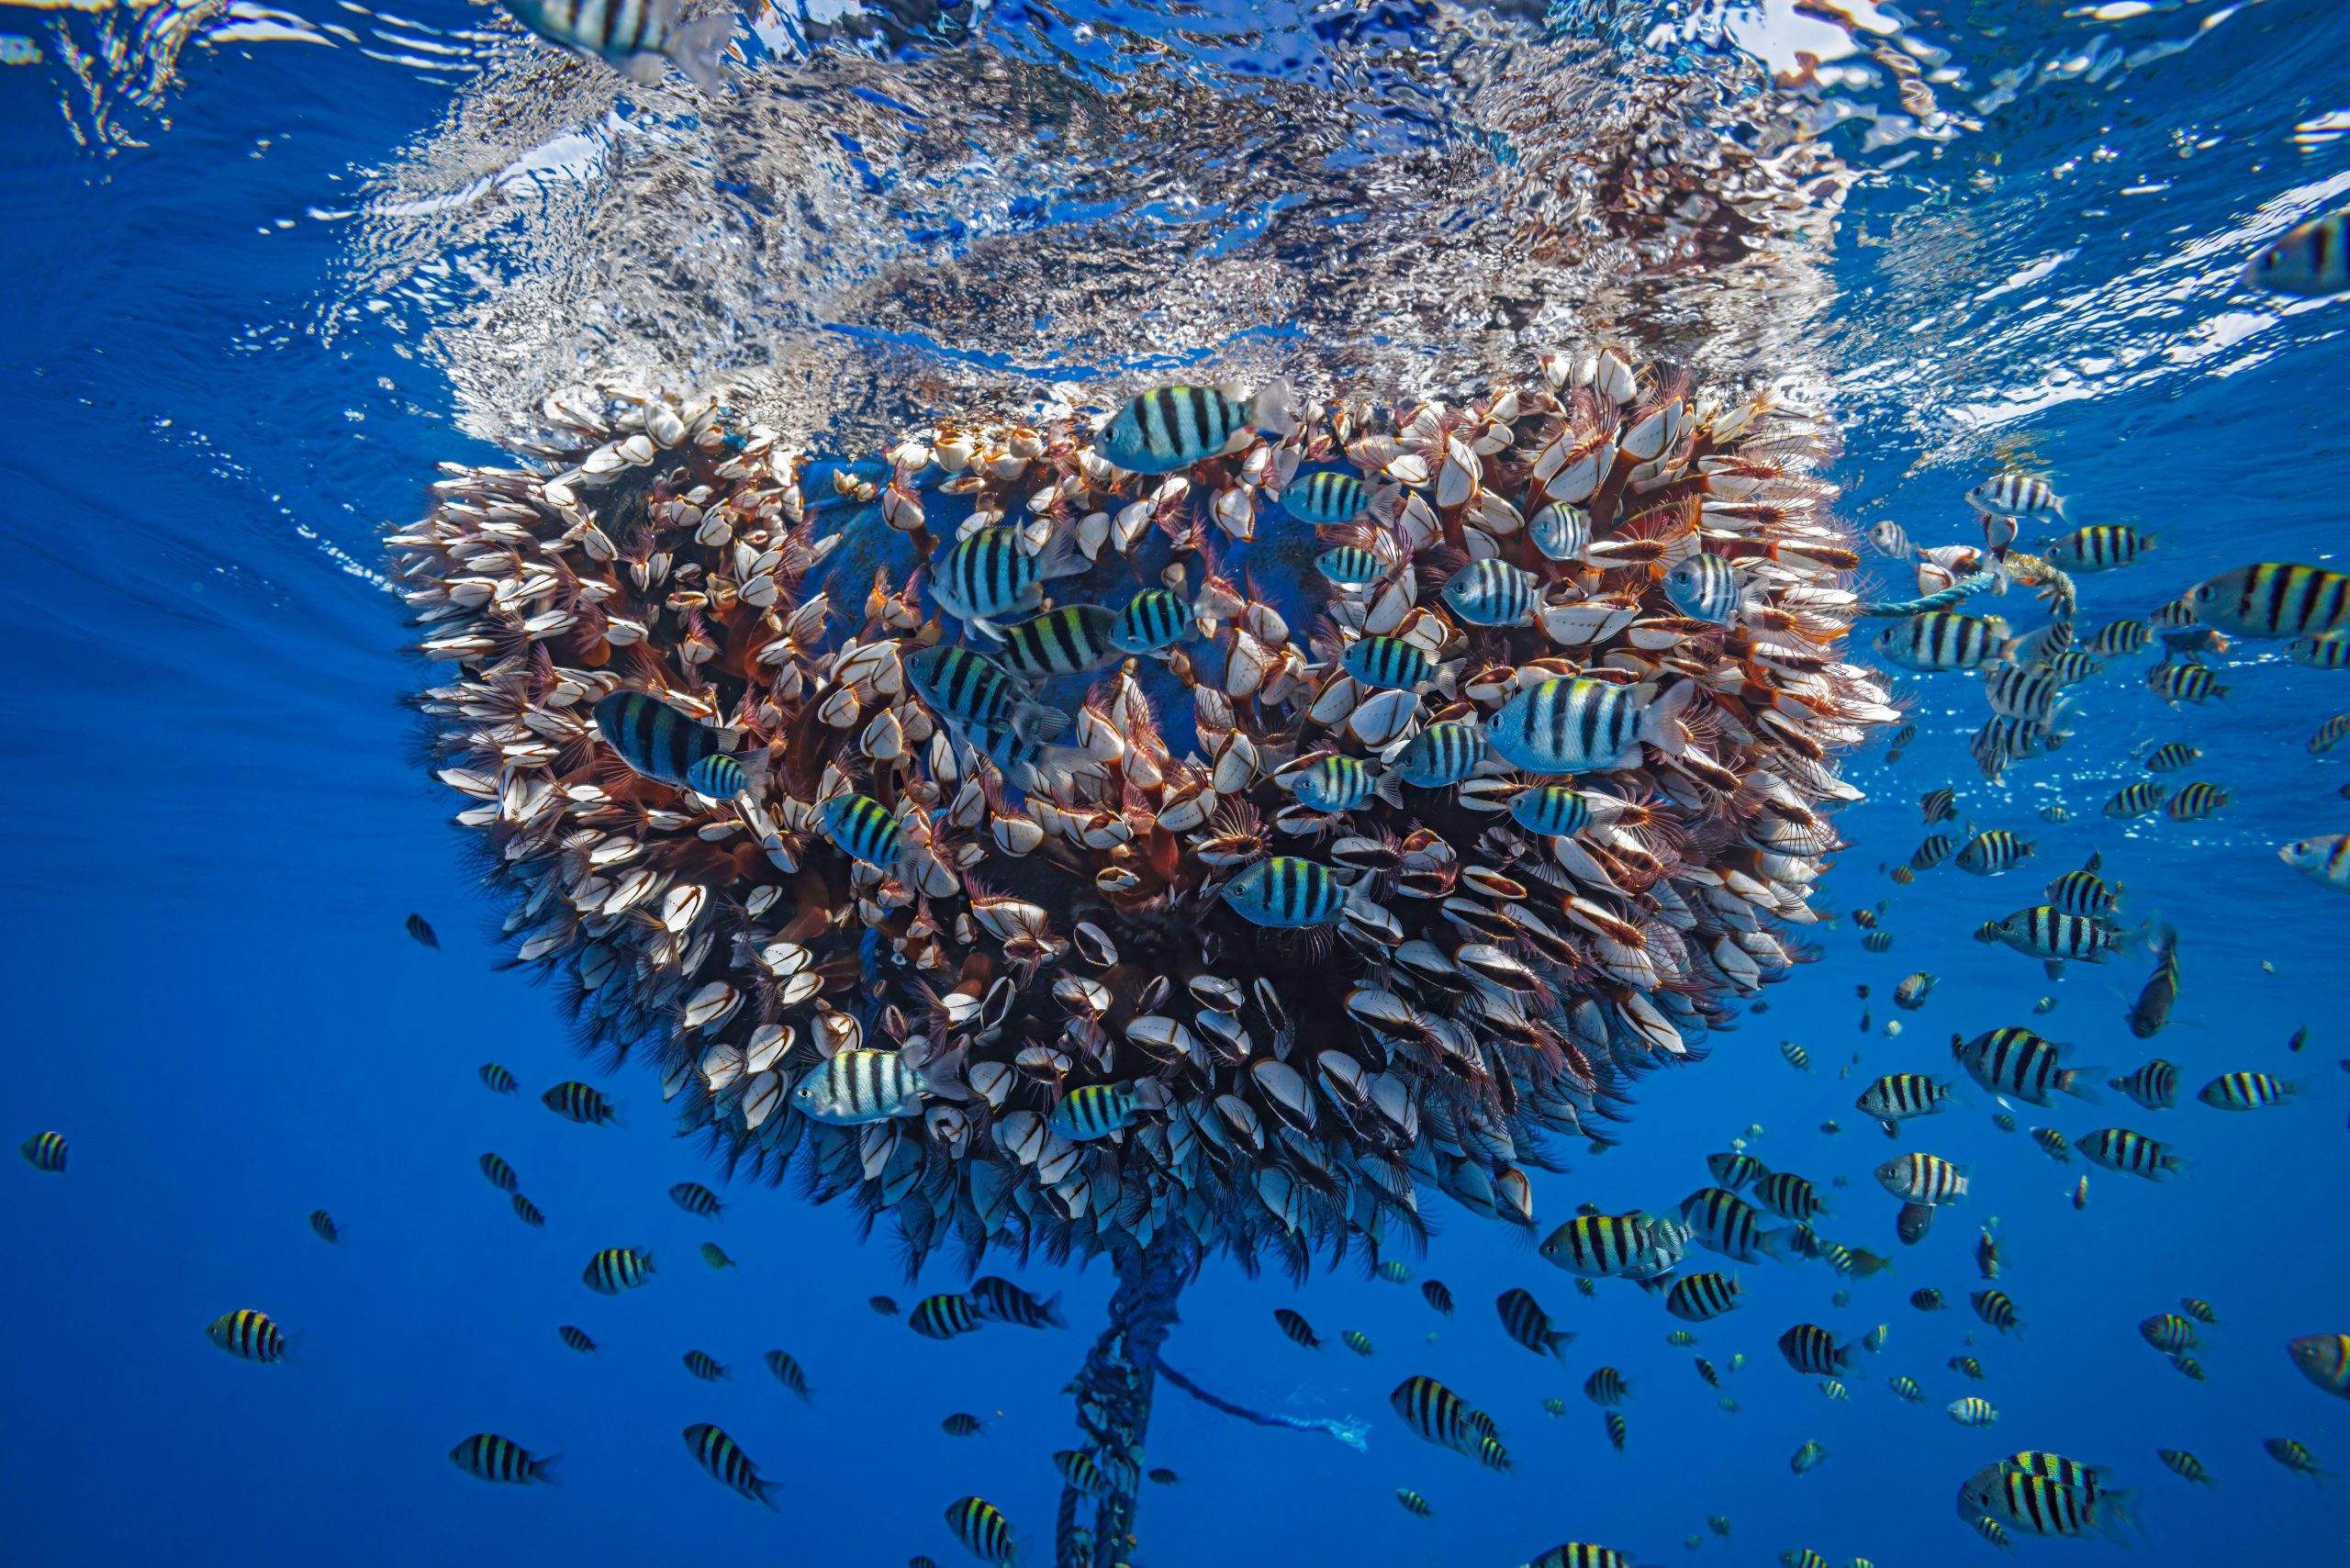 <p>Juvenile sergeant major damselfish congregating around a buoy, part of a fish aggregating device, off the coast of Timor-Leste. Such devices have been part of a long-running scientific and political row over how tuna fishers should work. (Image: David Fleetham / Alamy)</p>